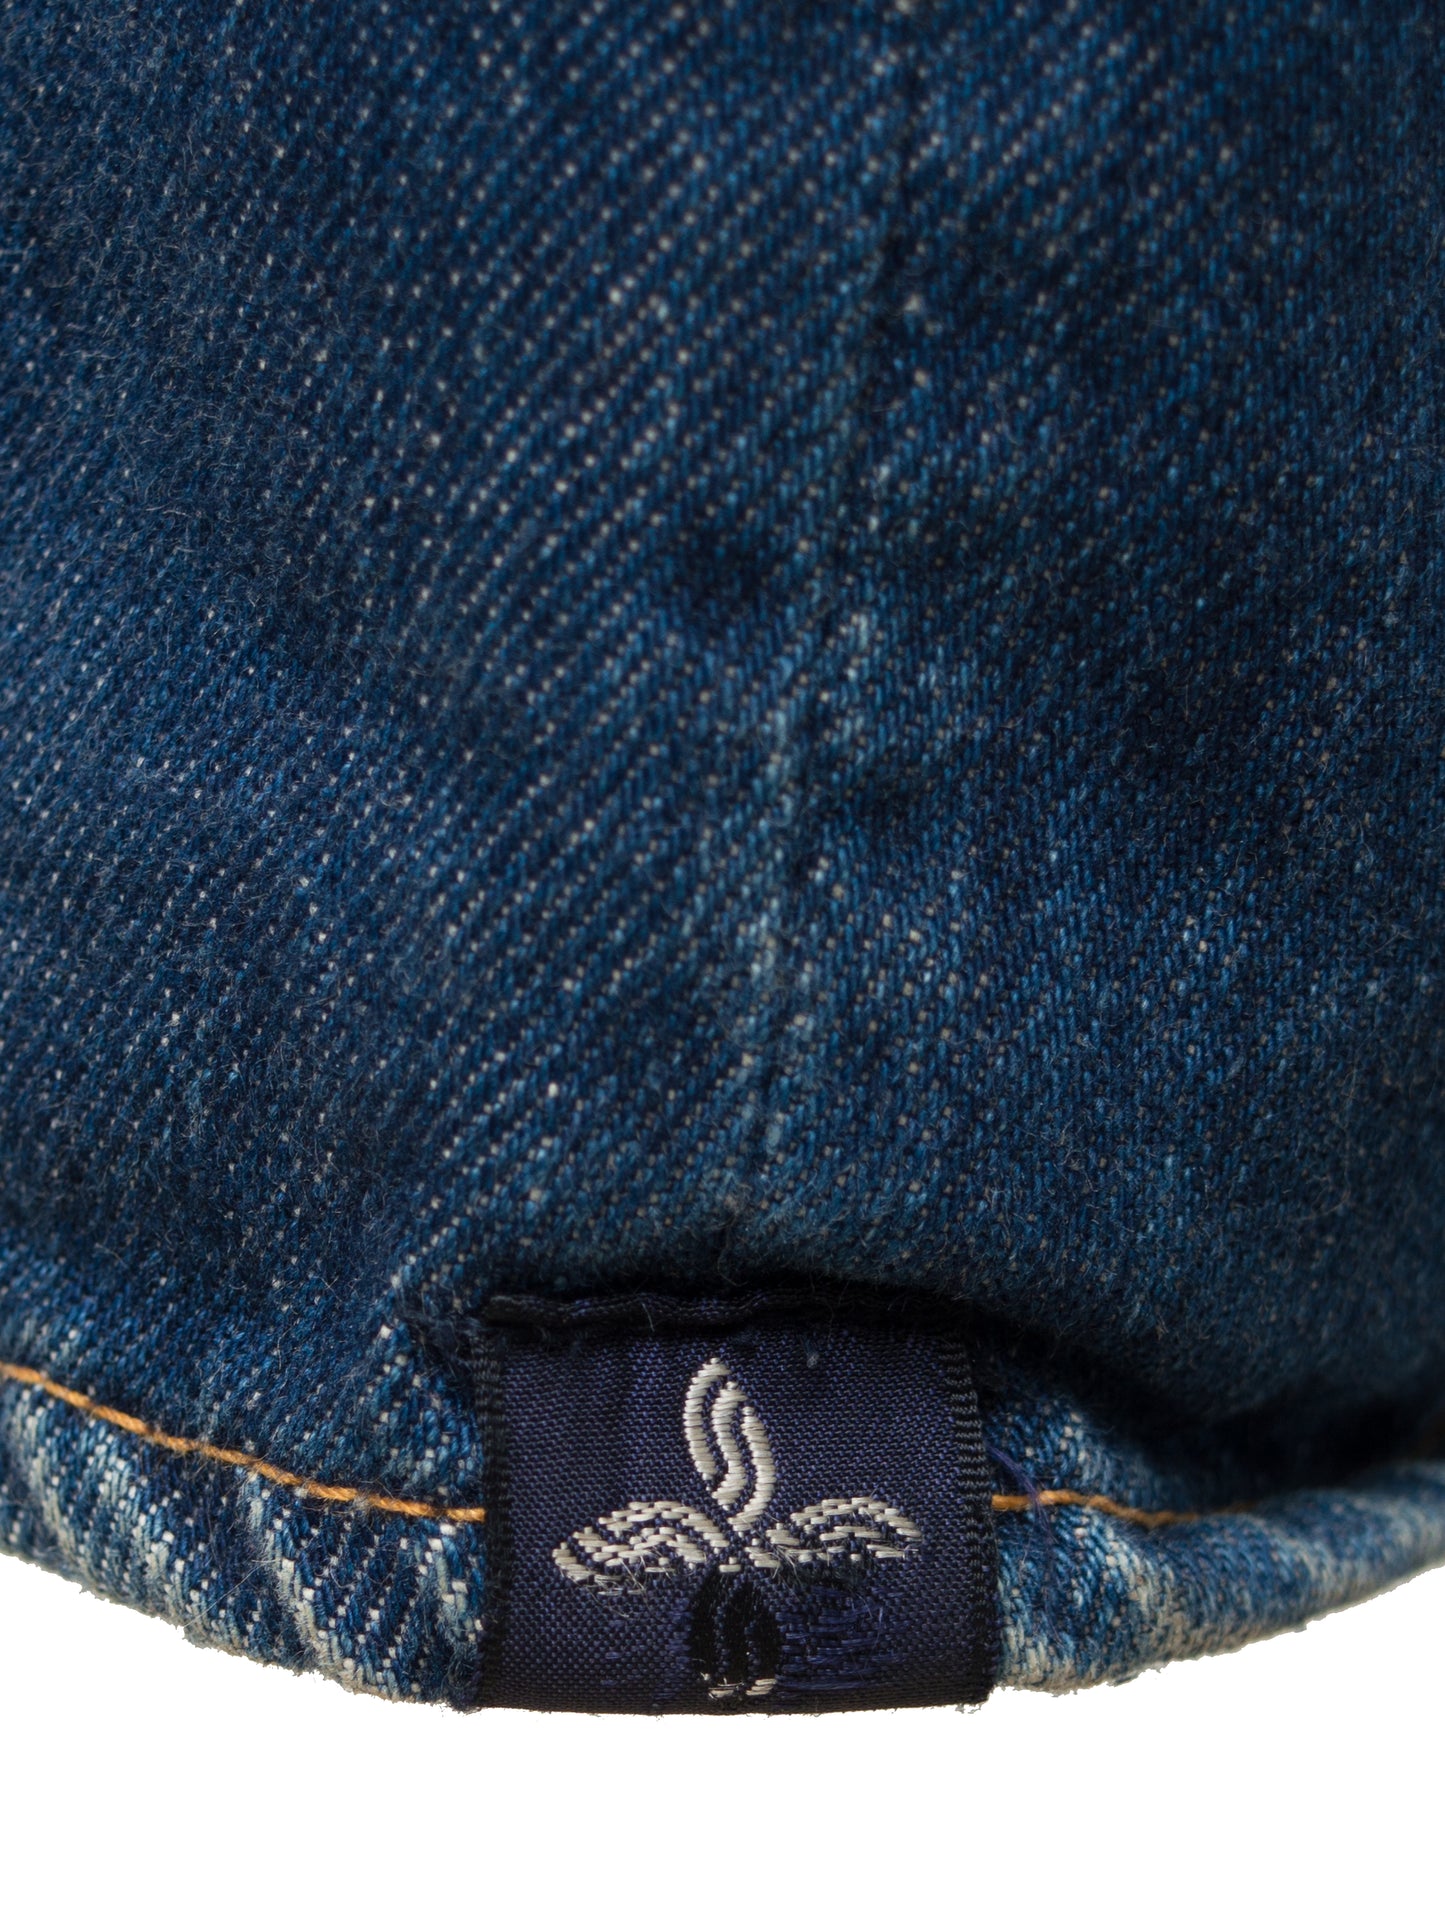 spotted horse jeans magic wash ∙ cotton ∙ 30